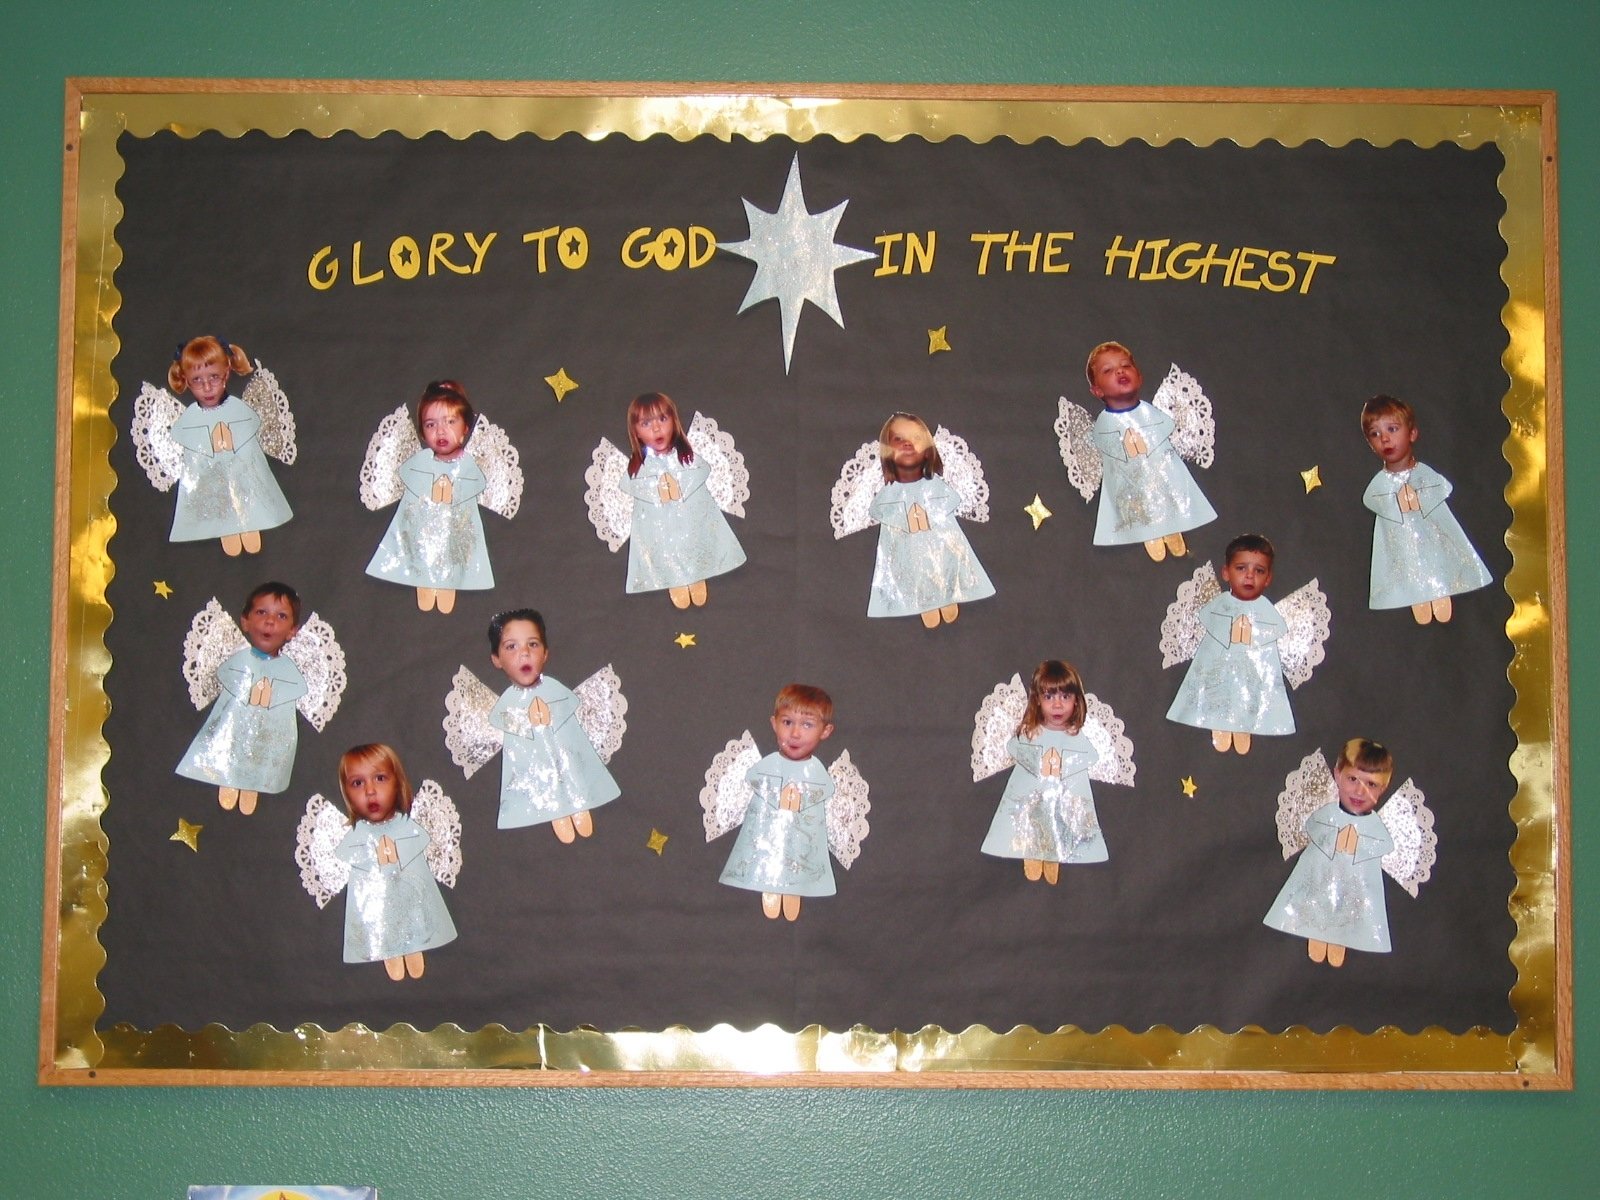 10 Lovely Christmas Bulletin Board Ideas For Church made a heavenly host out of my preschoolers sweet lil angels 1 2022